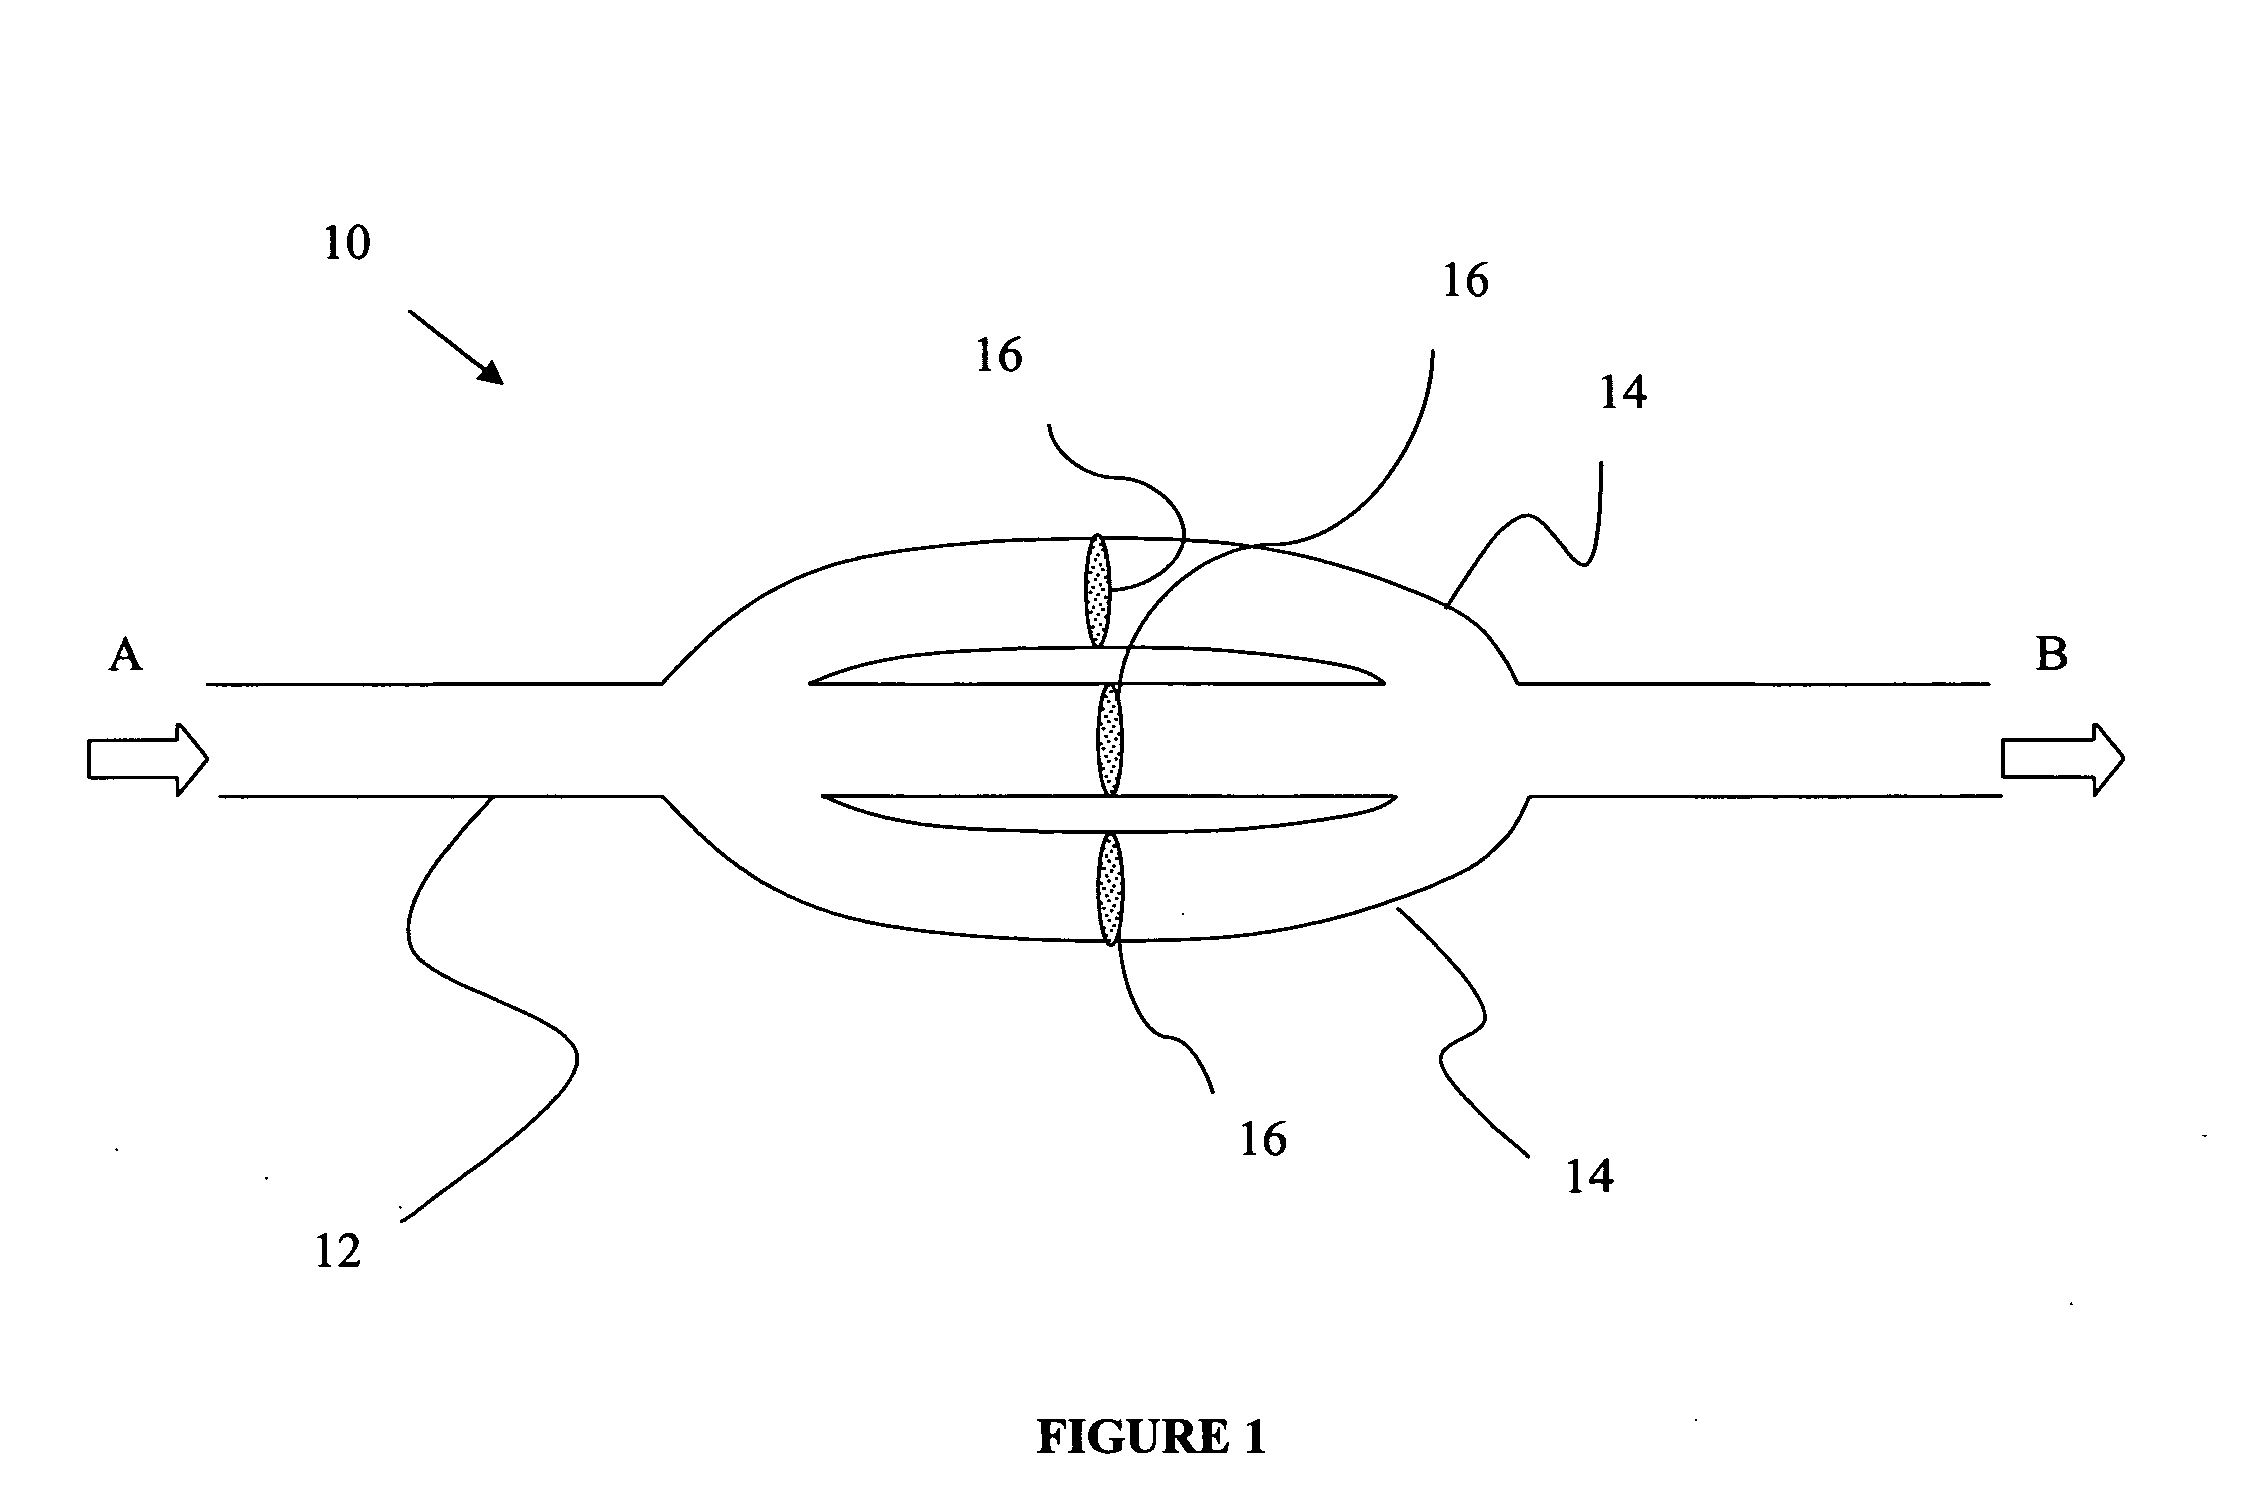 Implantable prosthetic device for connection to a fluid flow pathway of a patient